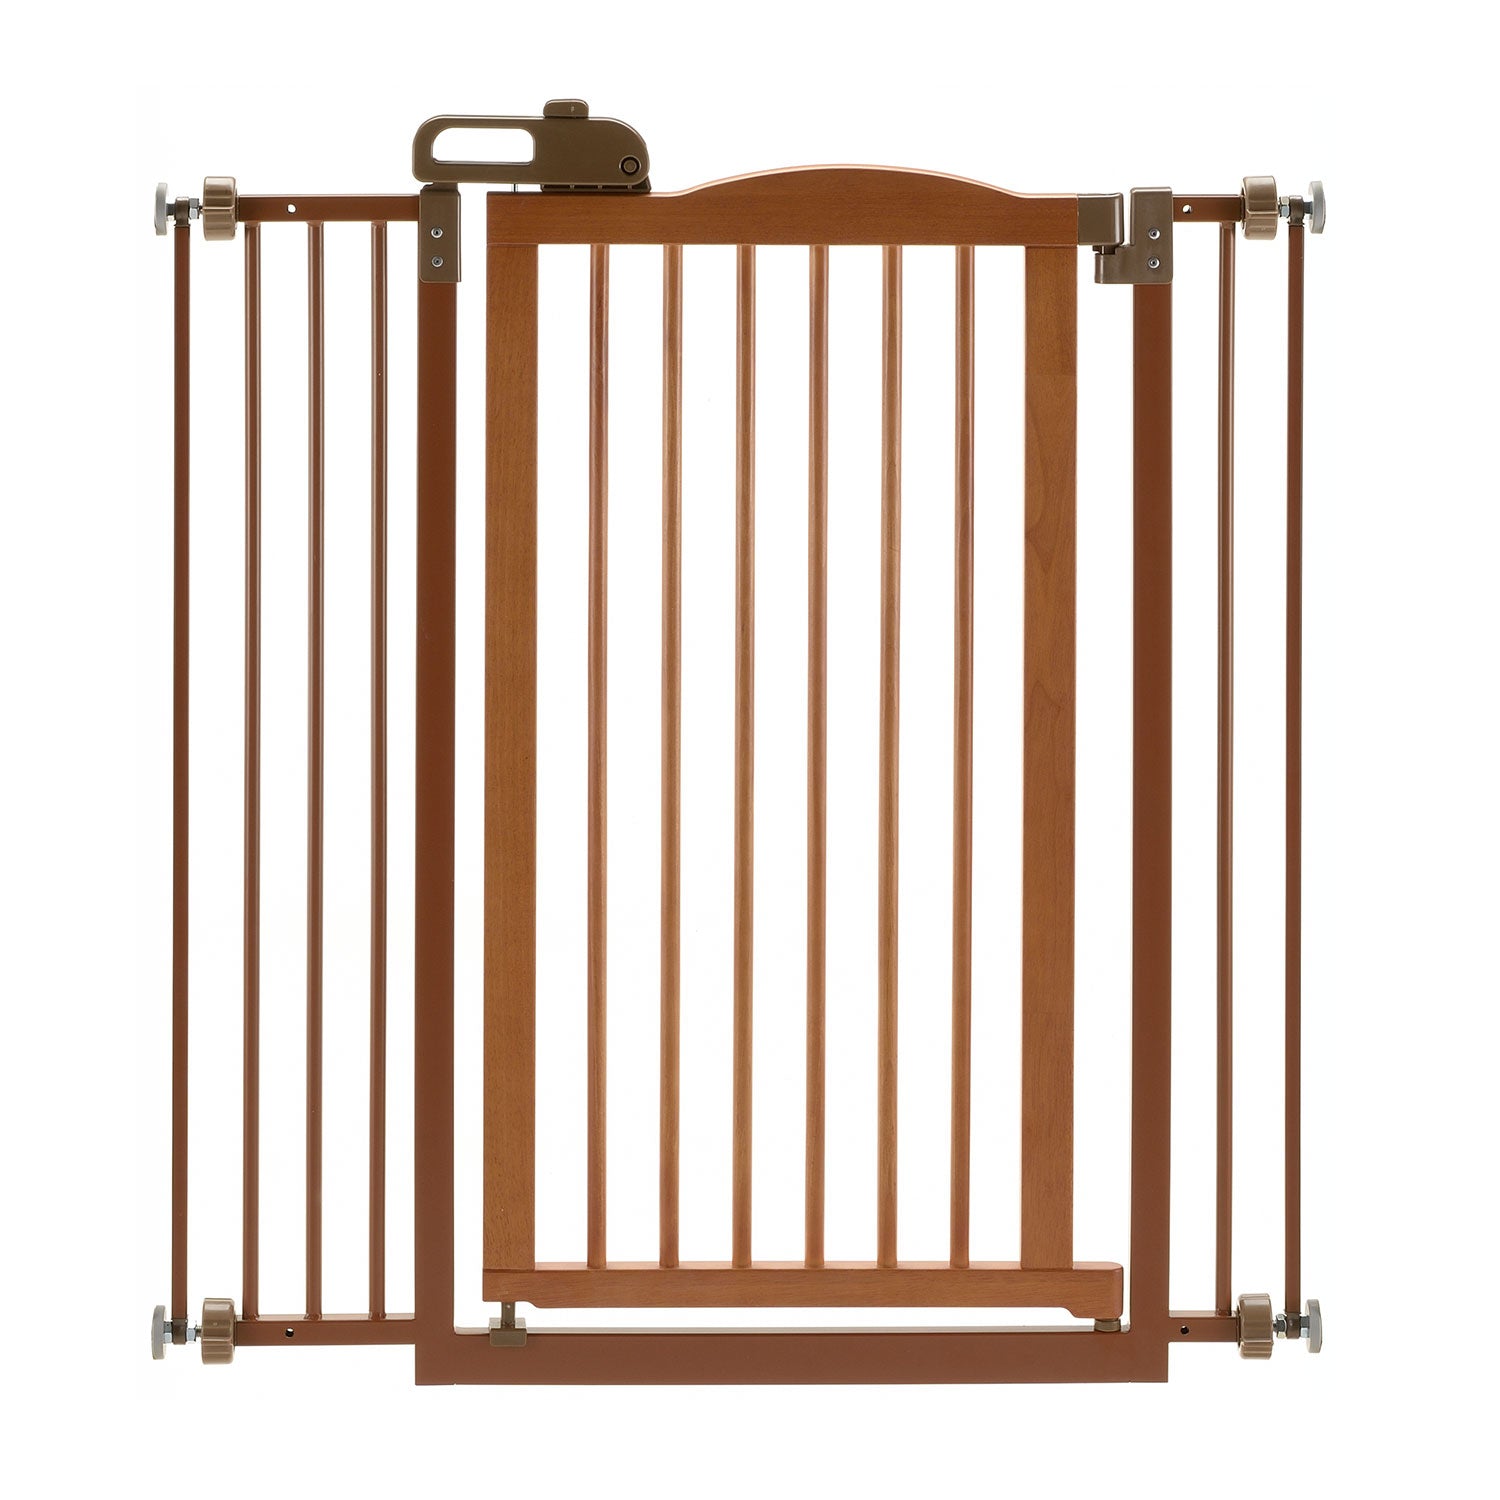 Richell R94930 Tall One-touch Pressure Mounted Pet Gate Ii